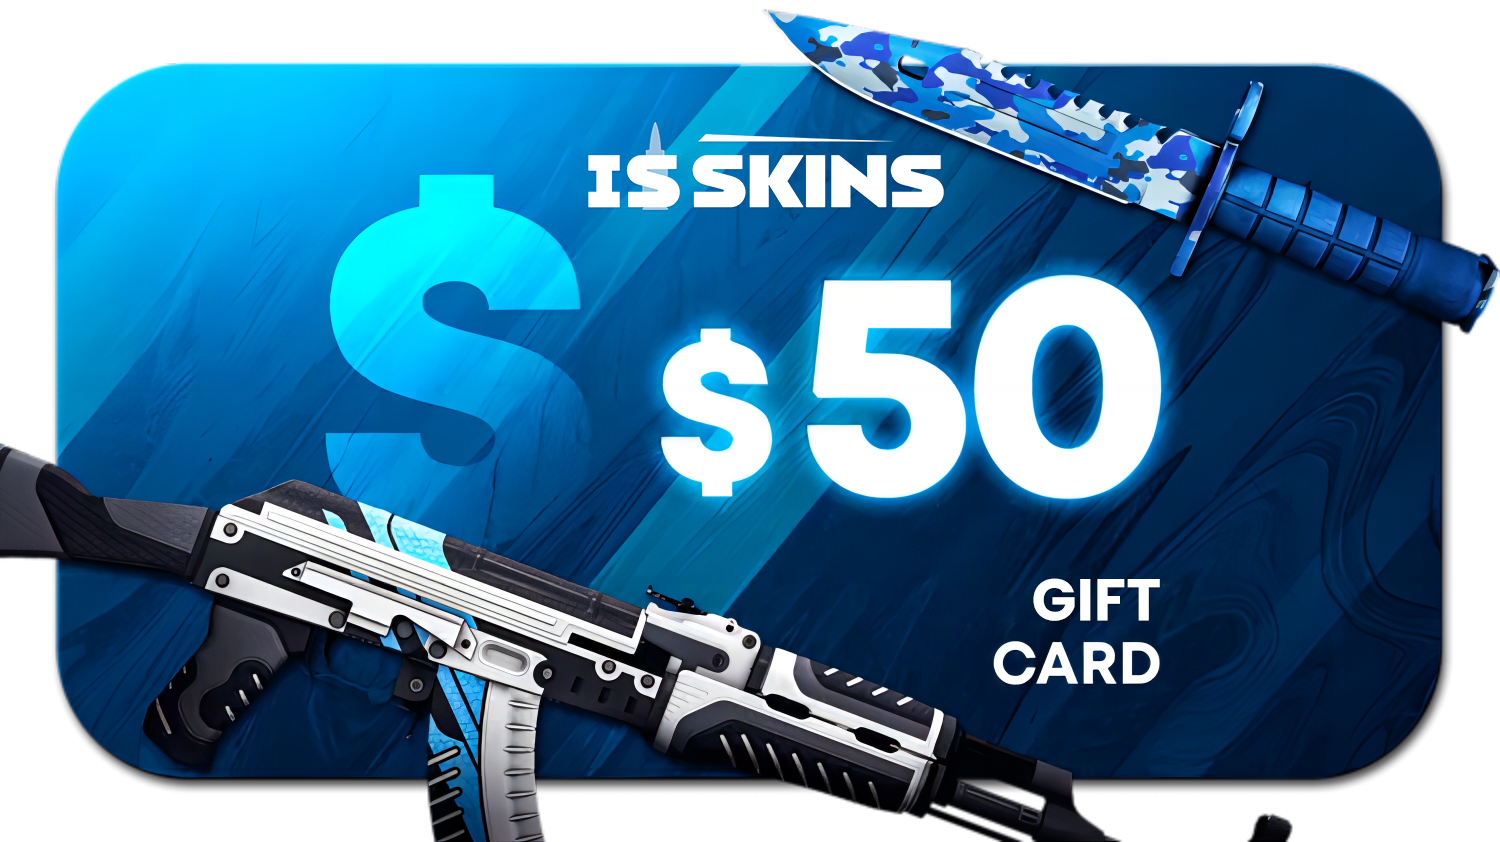 ISSKINS $50 Gift Card